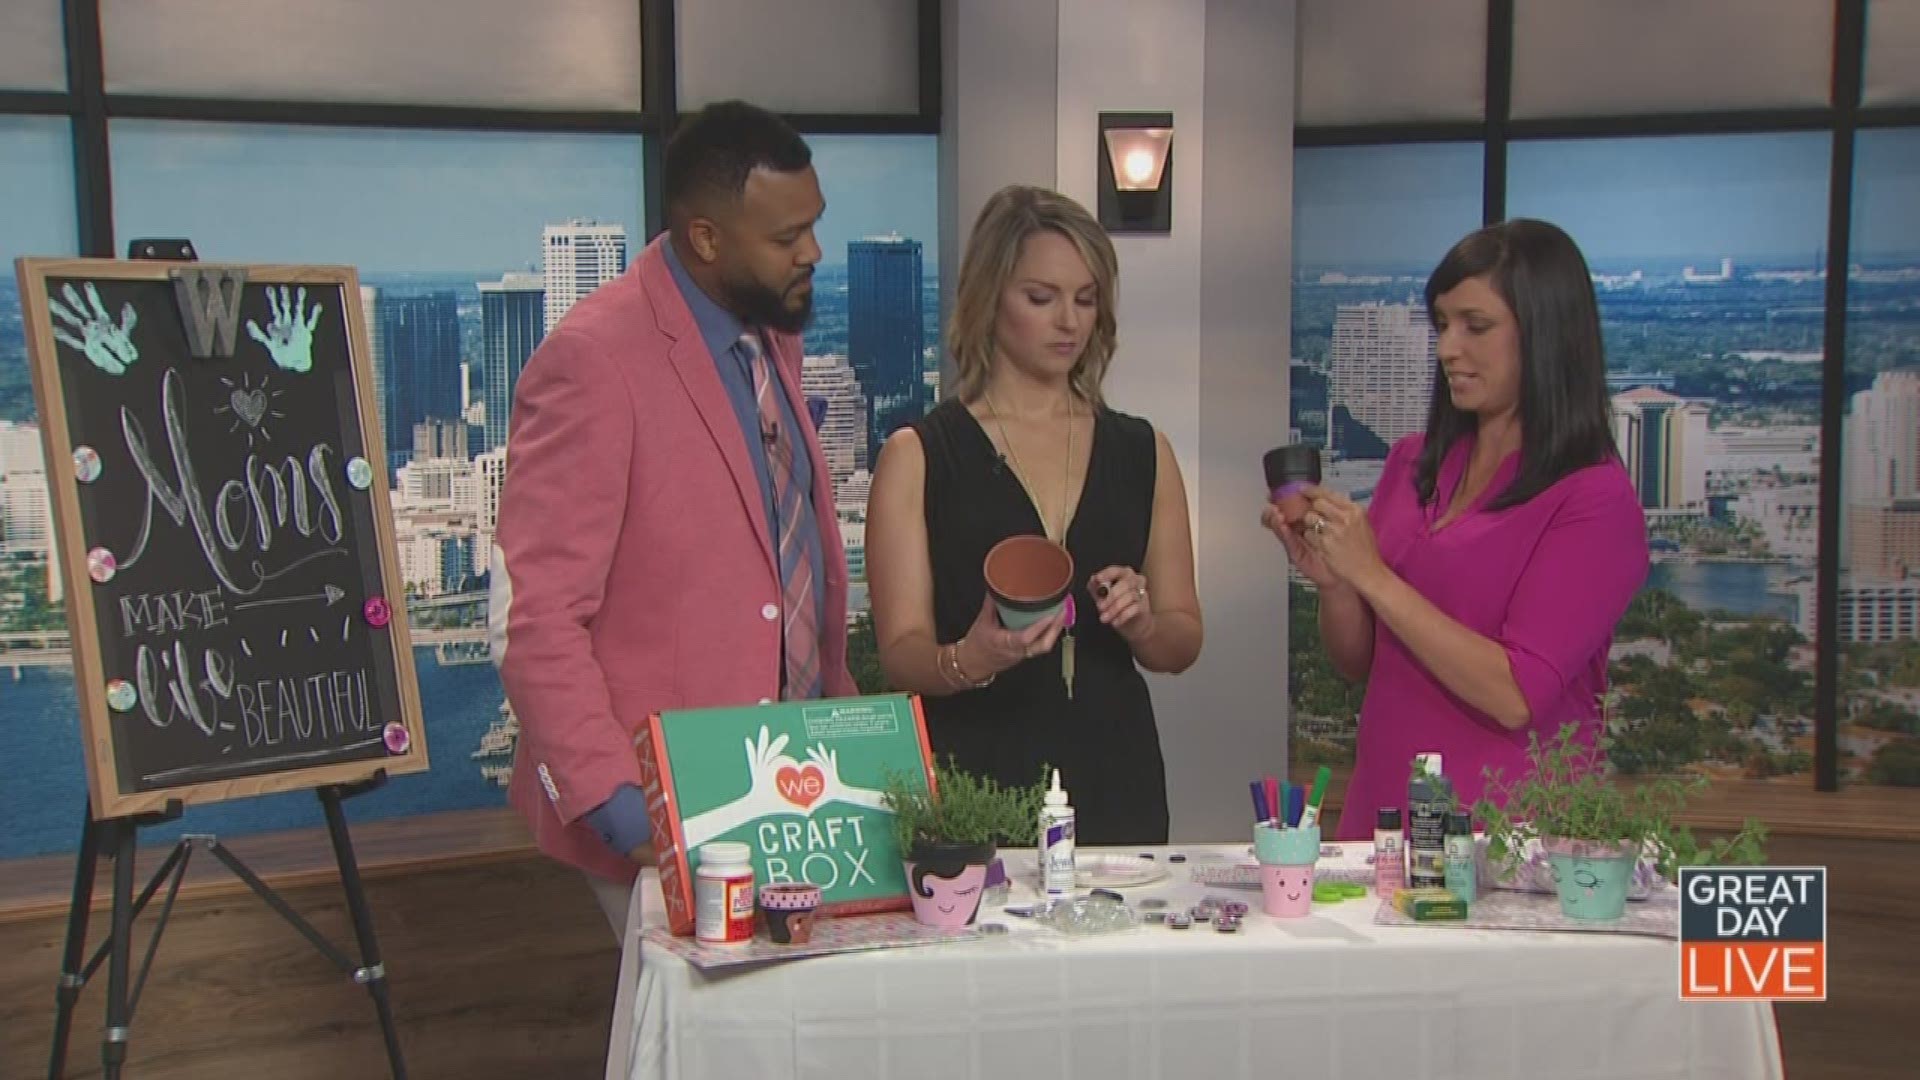 Betsy Wild gave us craft ideas to make with the kids for mom.